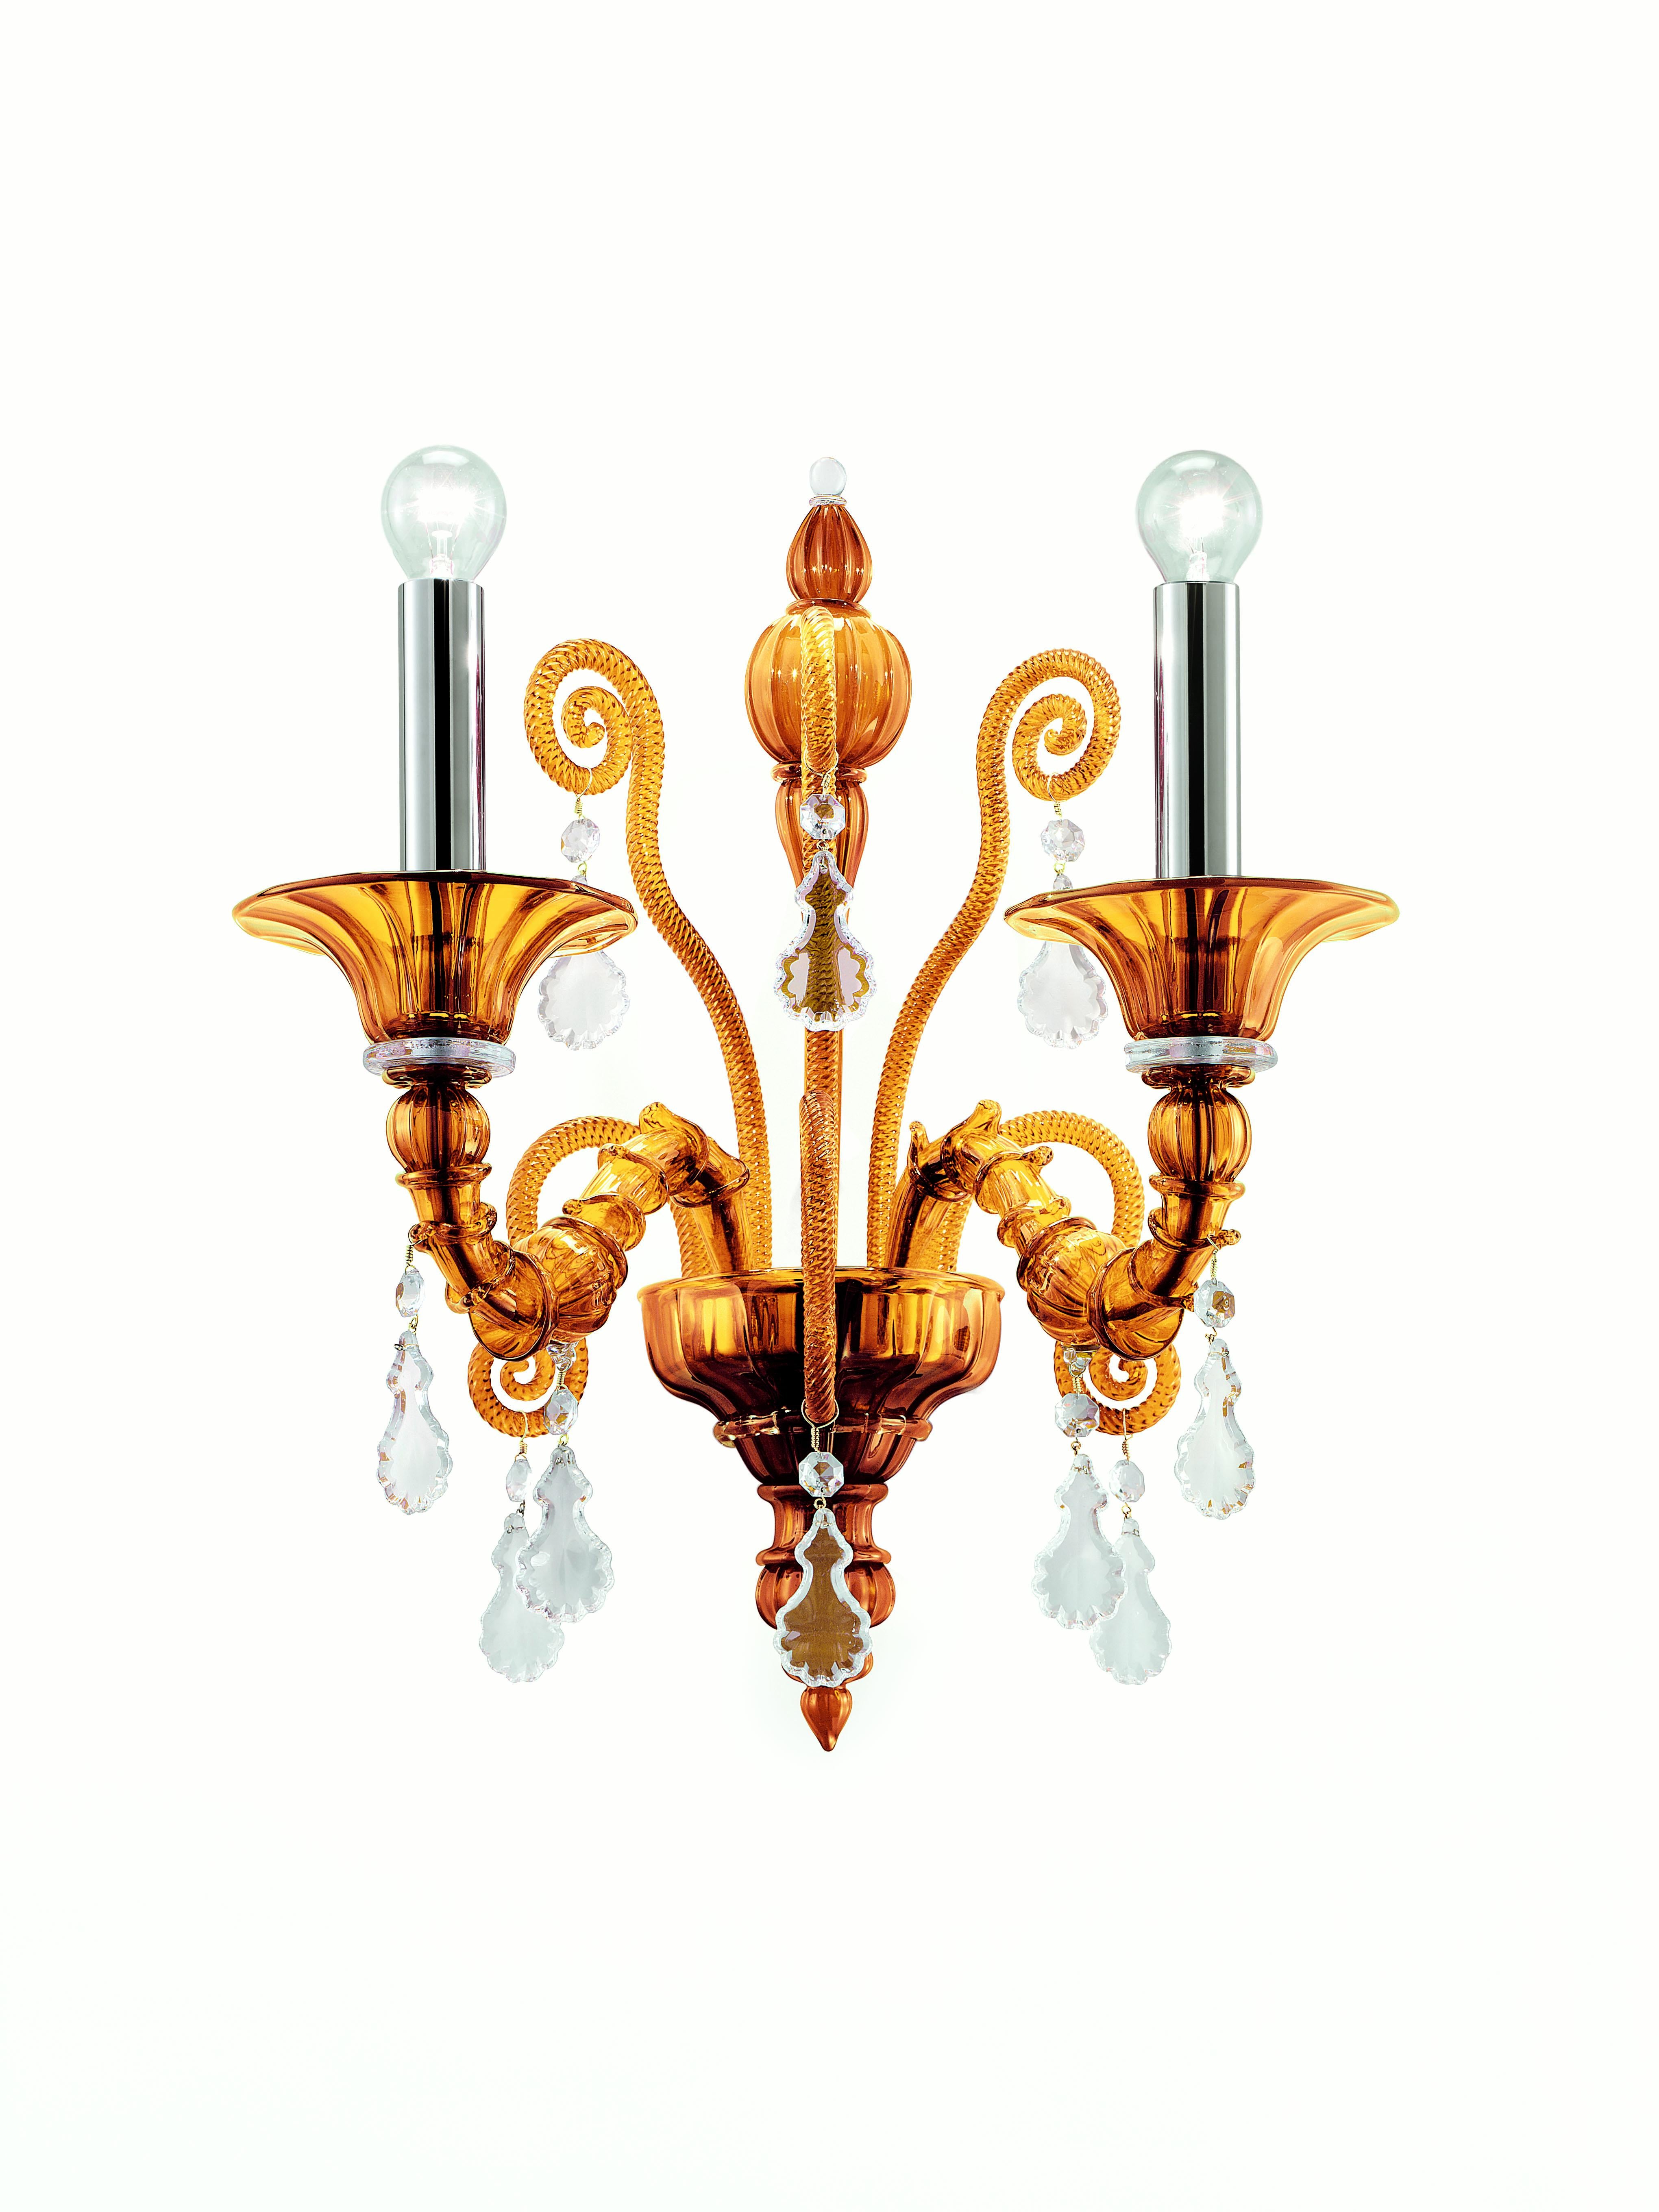 Orange (Liquid Orange_AL) Taif 5350 02 Wall Sconce in Glass with Chrome, by Barovier&Toso